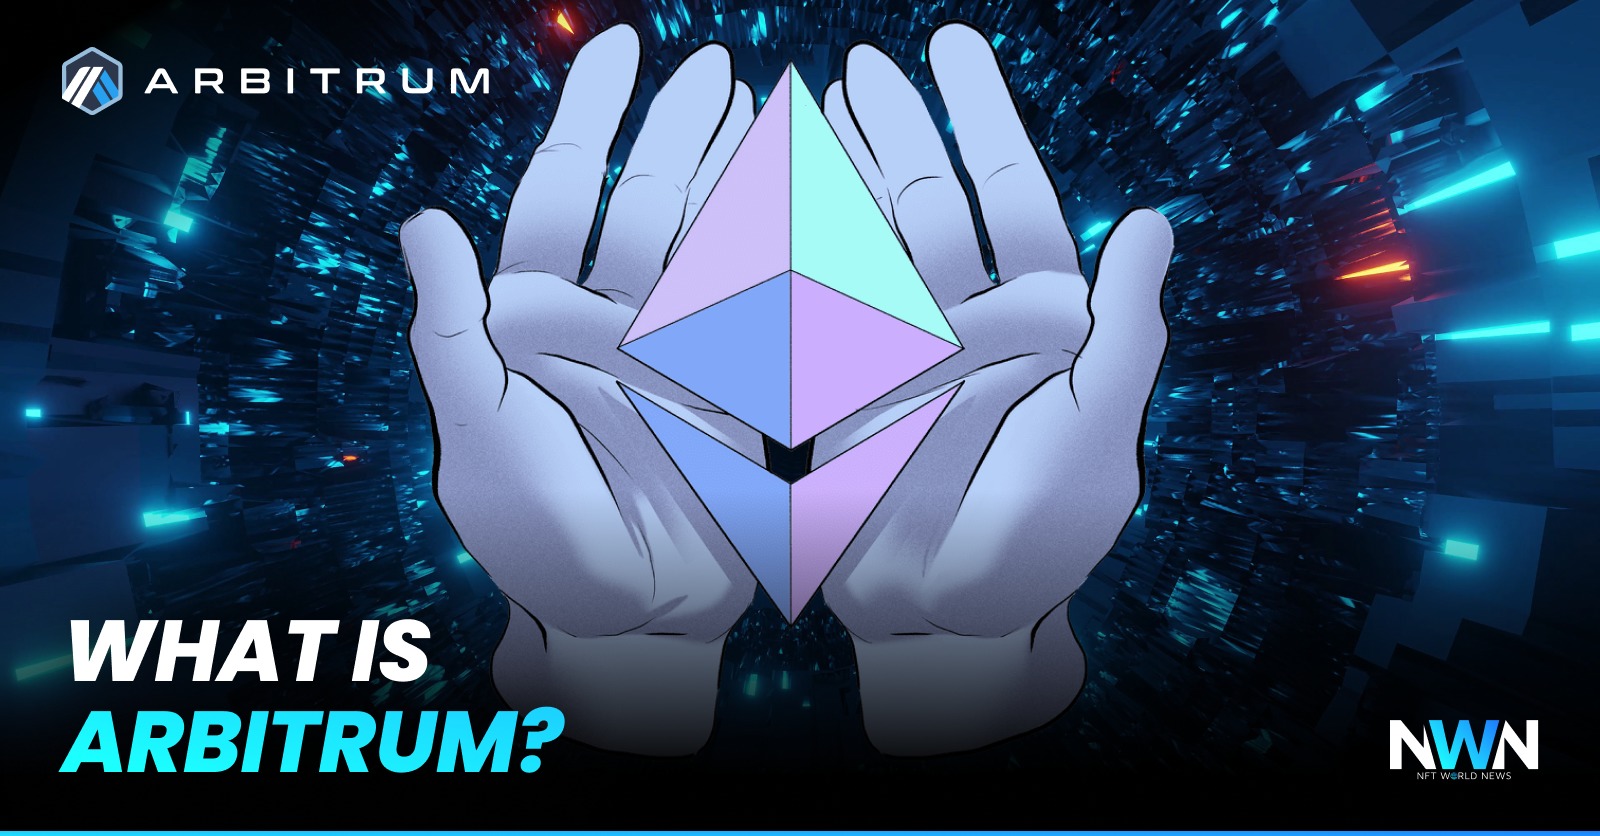 Arbitrum’s Ethereum Optimistic Rollup Solves Scaling Without Compromise